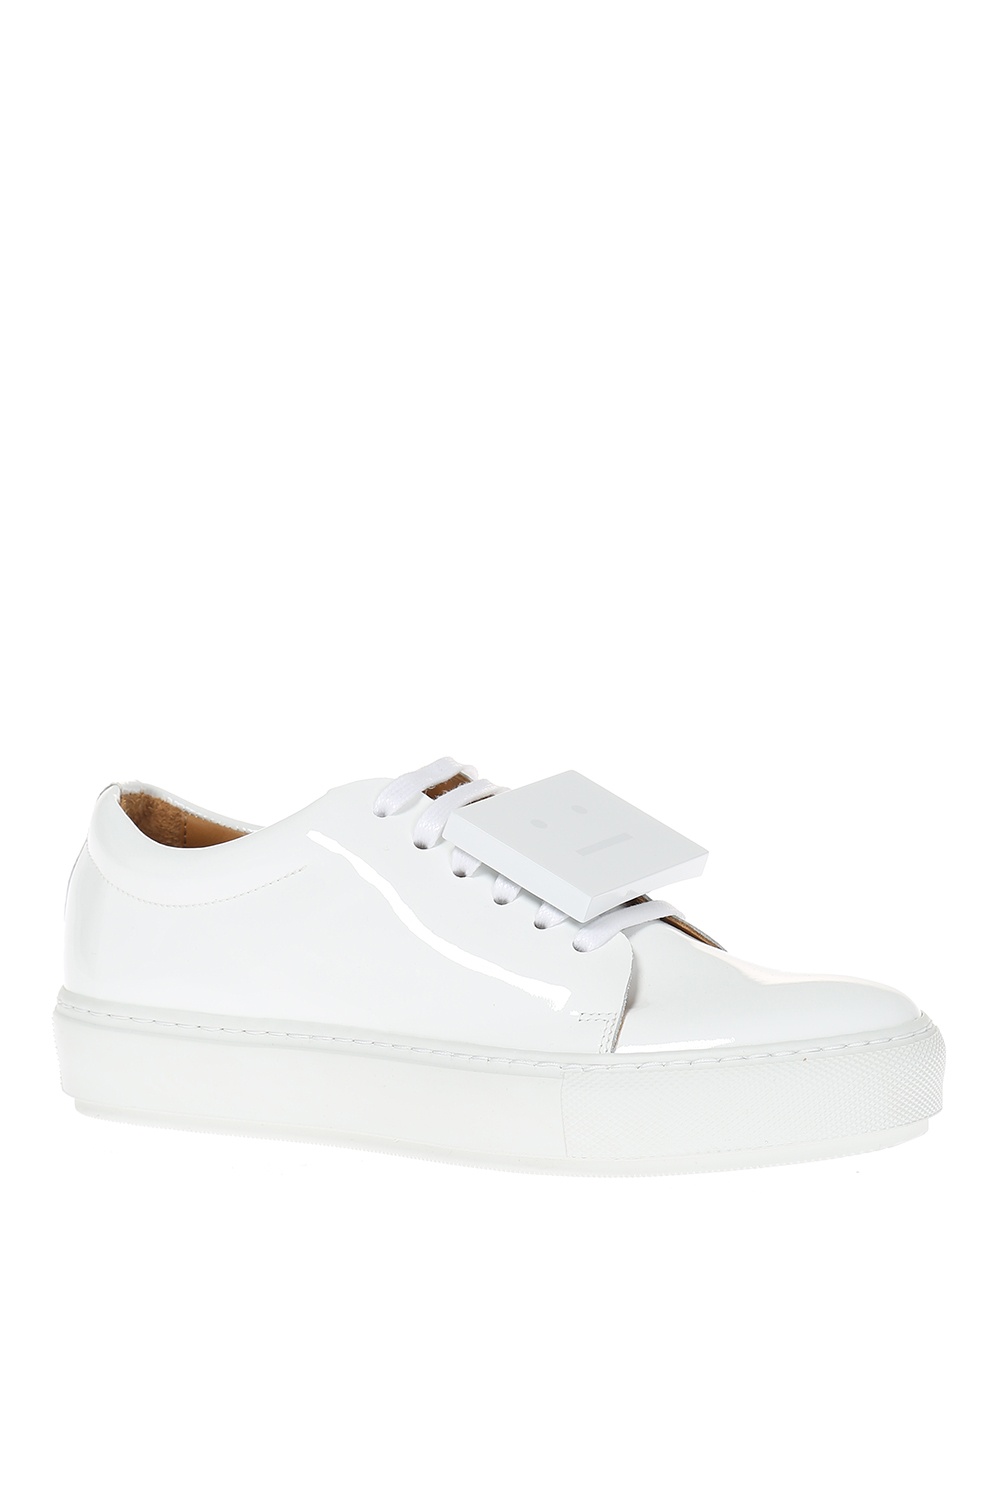 Acne Studios patent leather sneakers | Women's Shoes | Vitkac